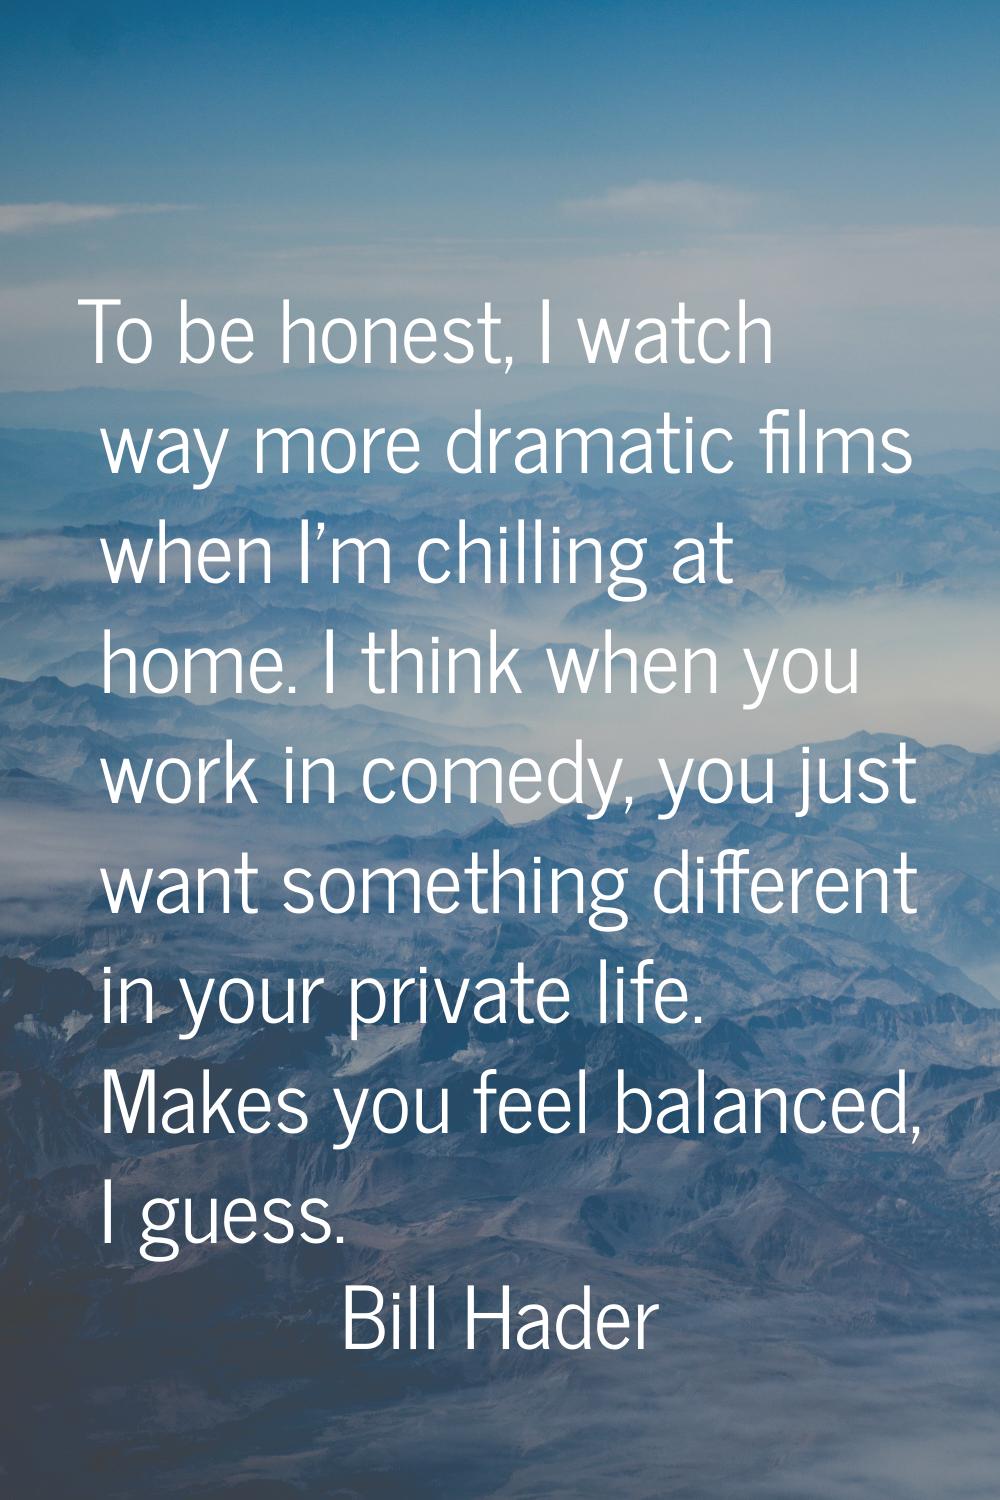 To be honest, I watch way more dramatic films when I'm chilling at home. I think when you work in c